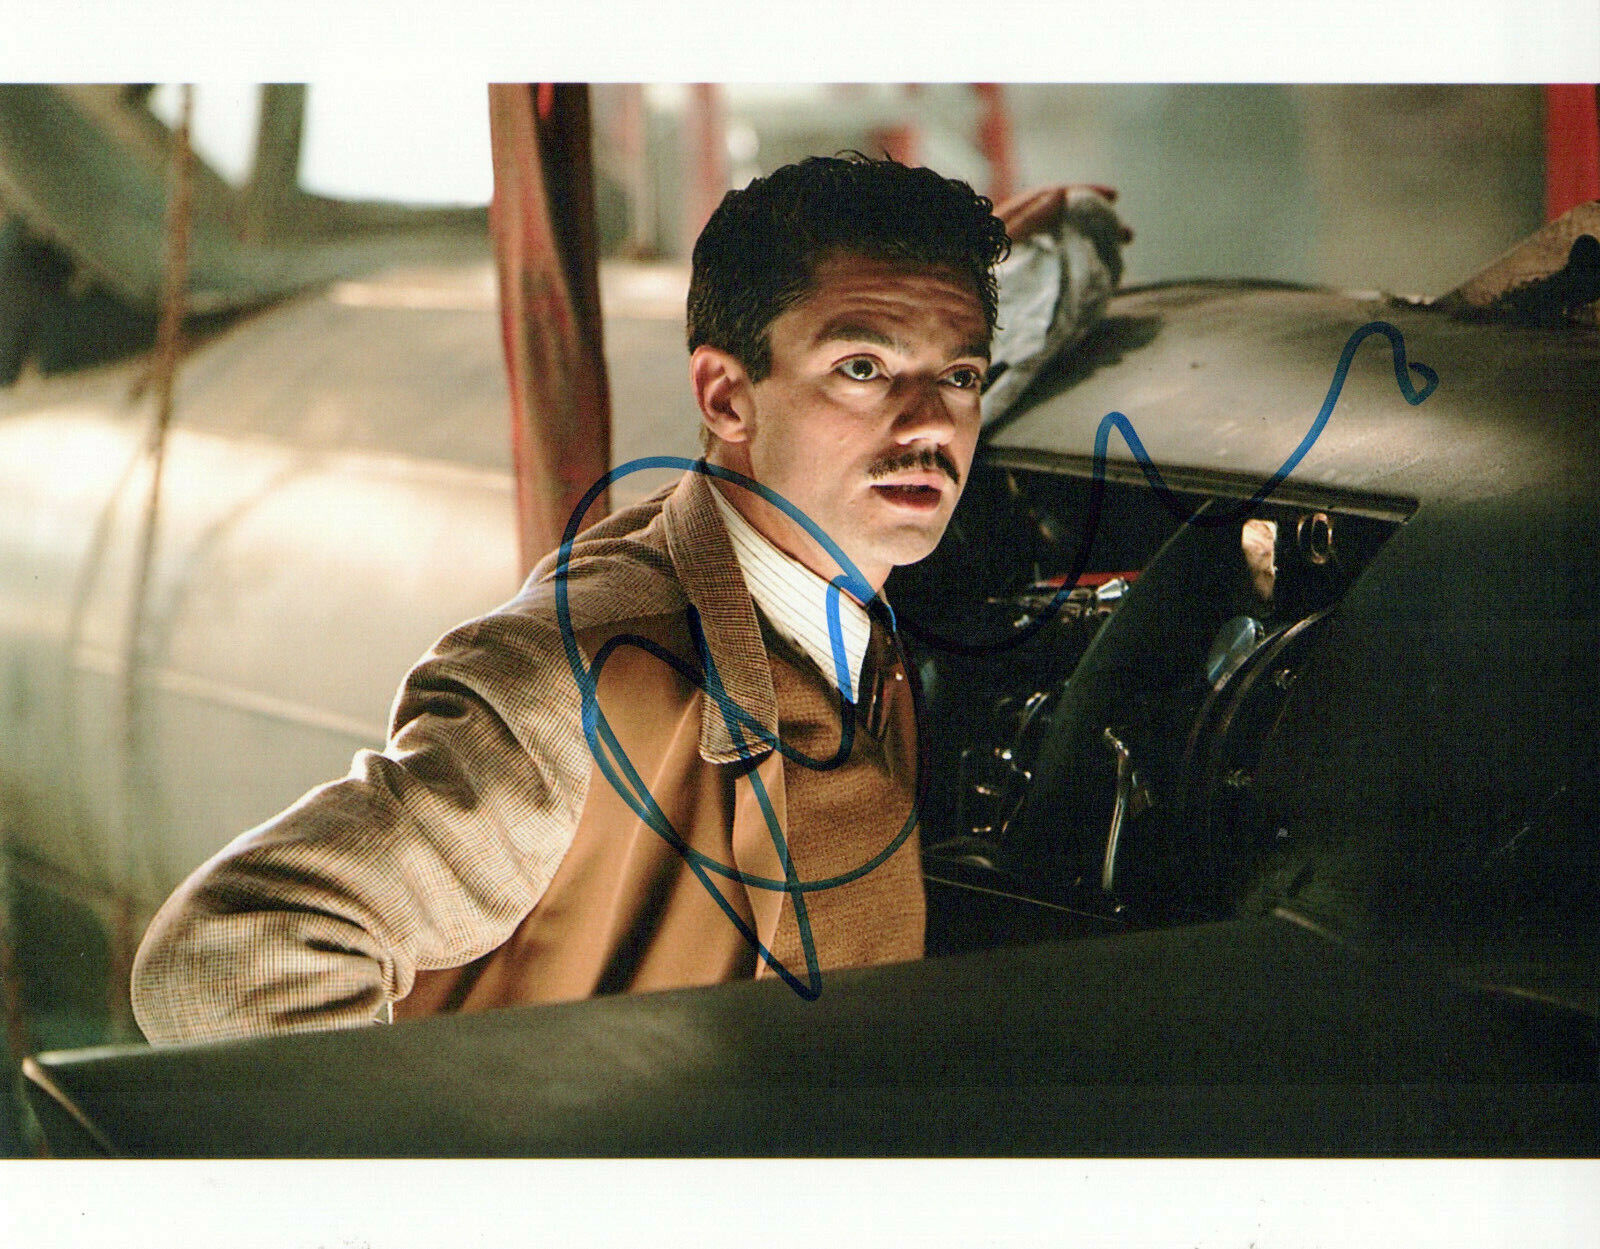 Dominic Cooper Captain America autographed Photo Poster painting signed 8x10 #3 Howard Stark